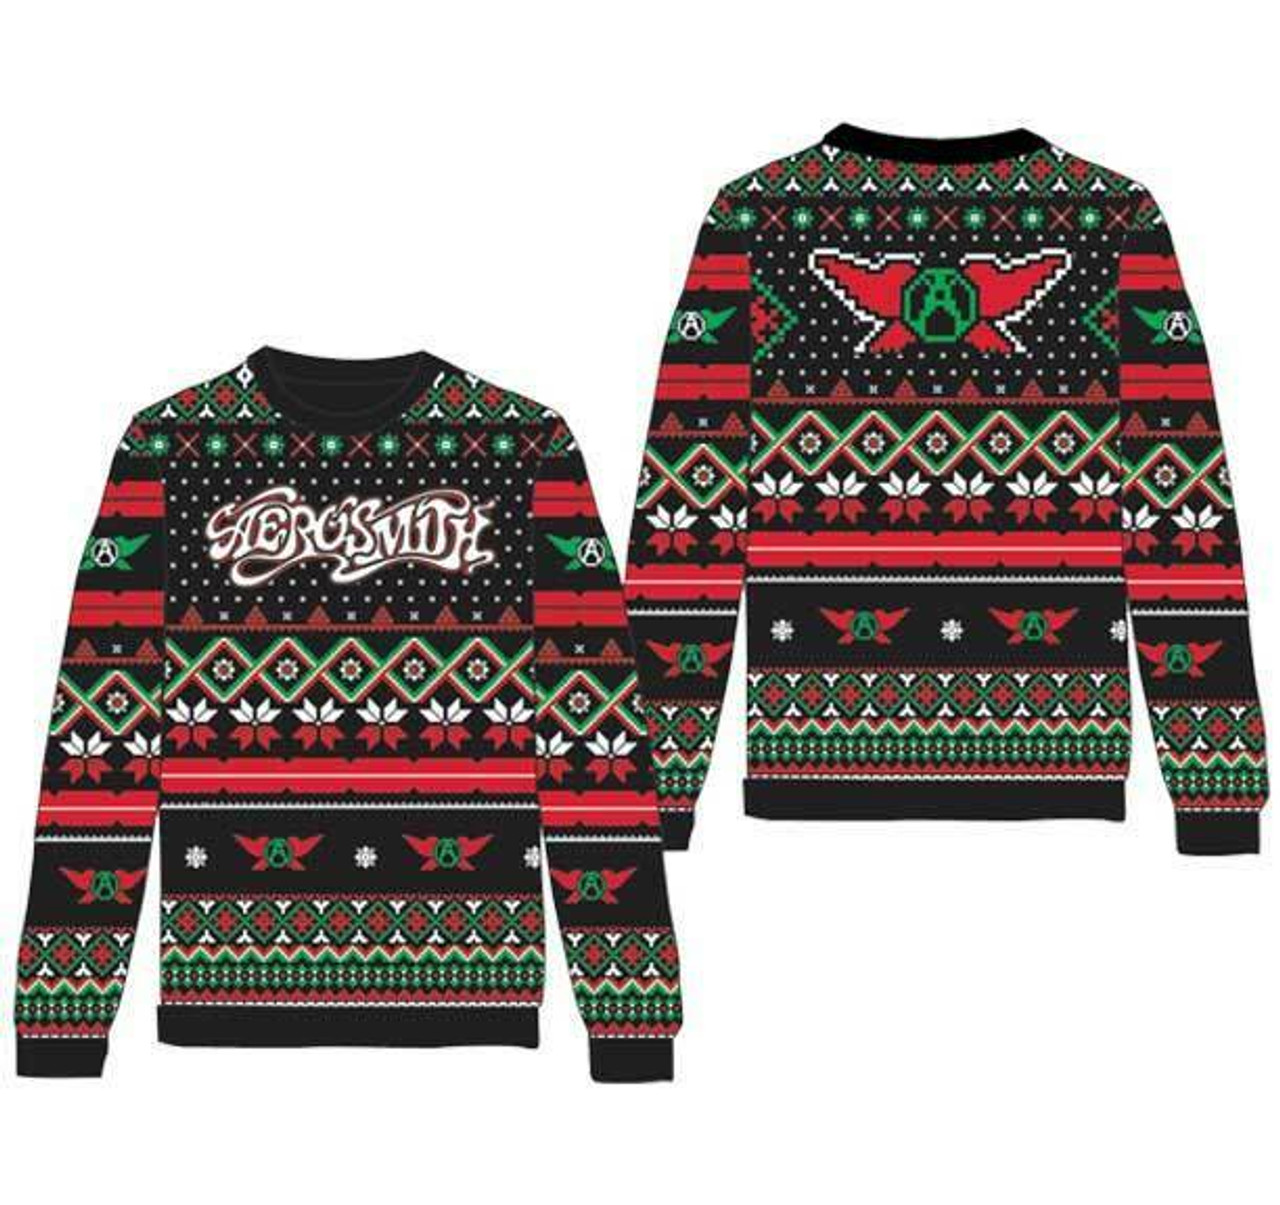 Aerosmith Rock and Roll Music 838440093 - Apparel Sweater Christmas Ugly Fearless Holiday Band